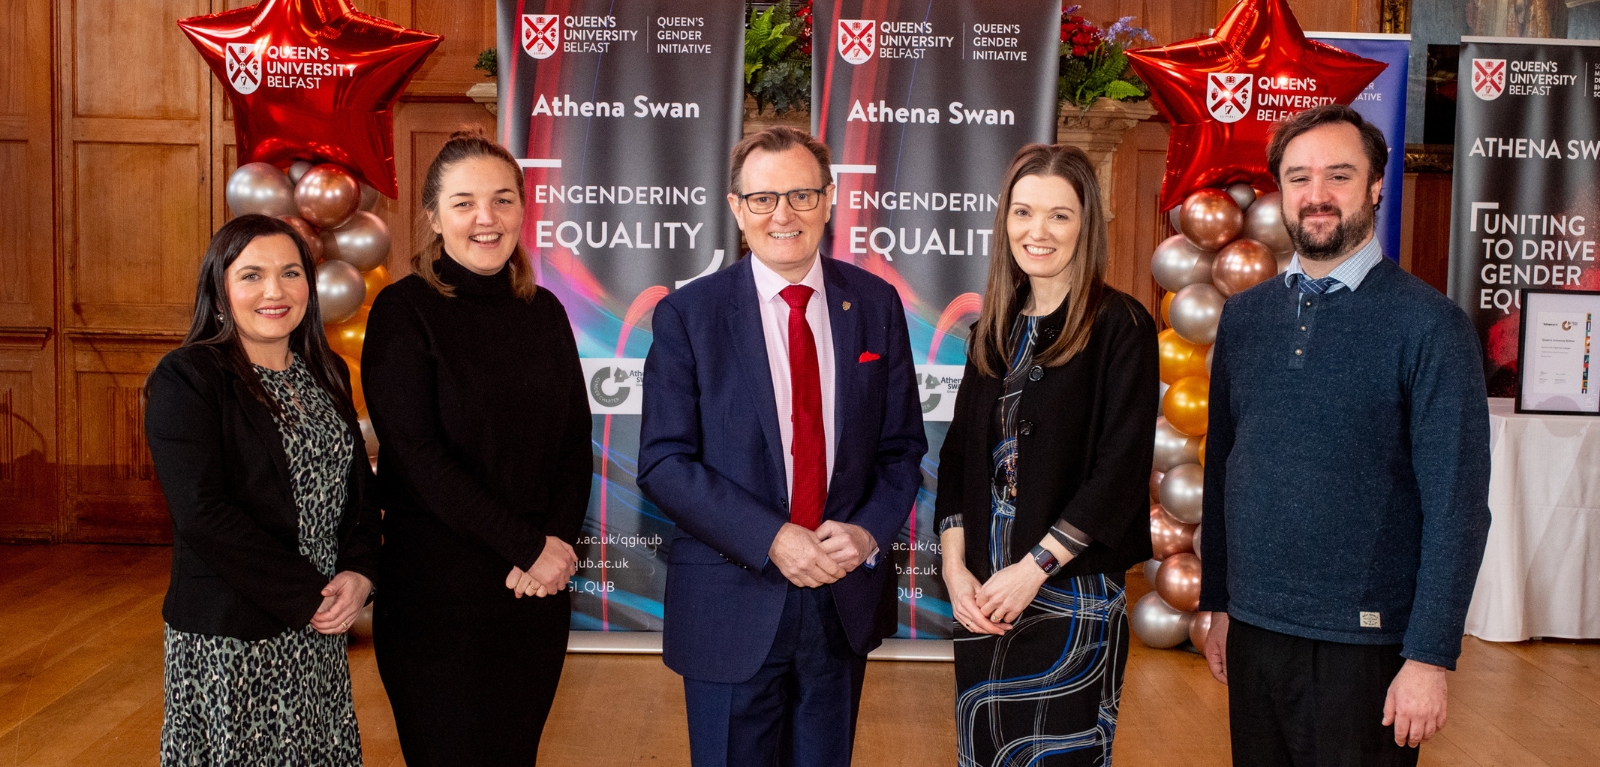 Professor Ian Greer and Professor Karen McCloskey (on right) pictured with representatives from Advance HE